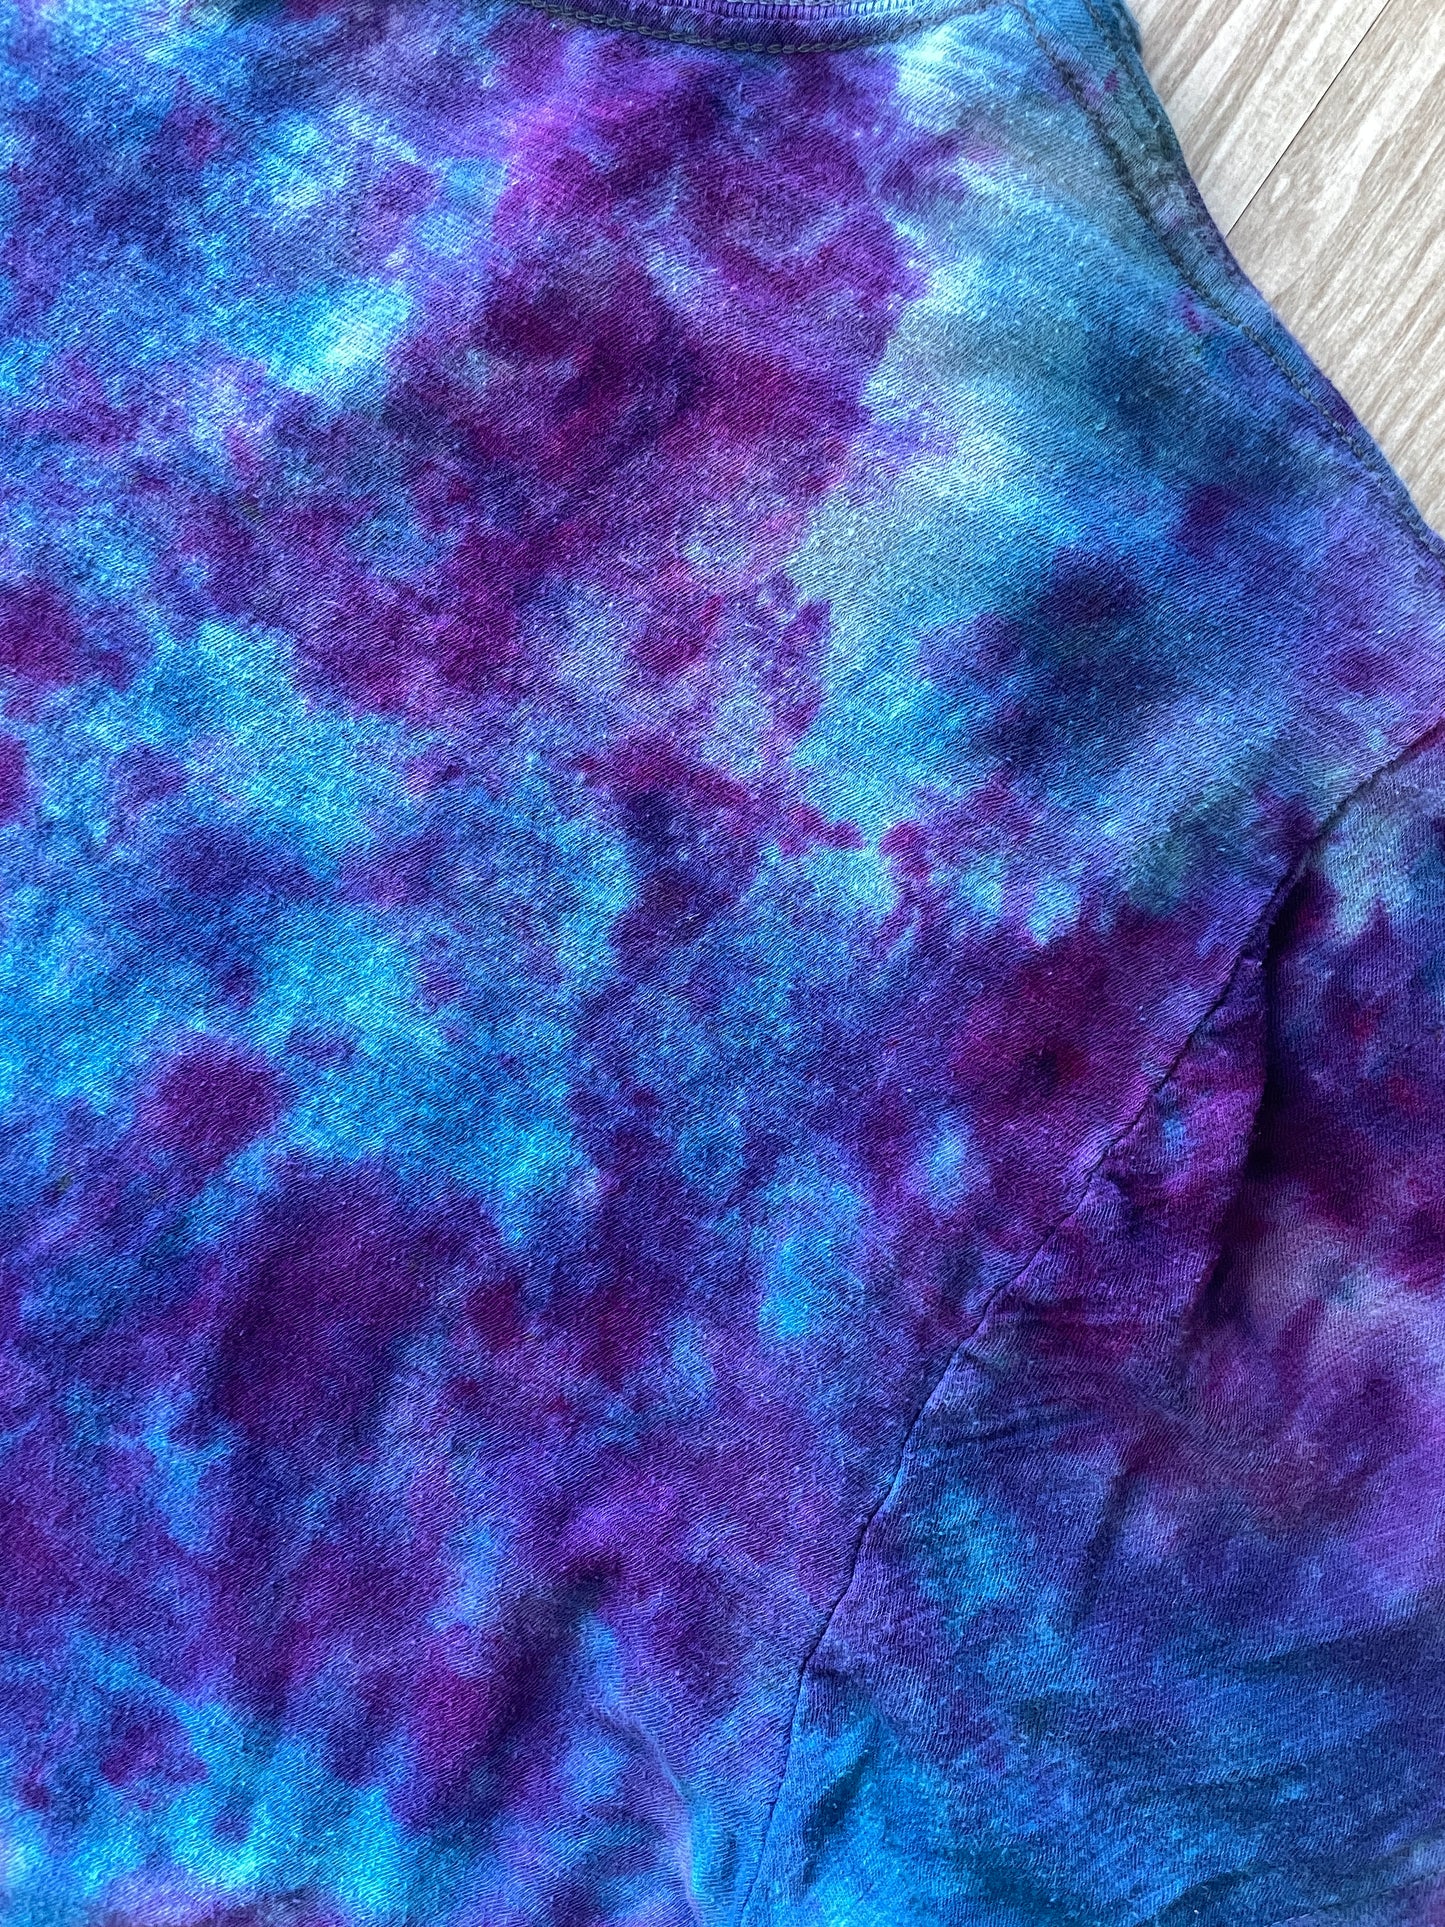 LARGE Women’s GAP London, UK Handmade Galaxy Tie Dye Short Sleeve T-Shirt | One-Of-a-Kind Upcycled Blue and Purple Top